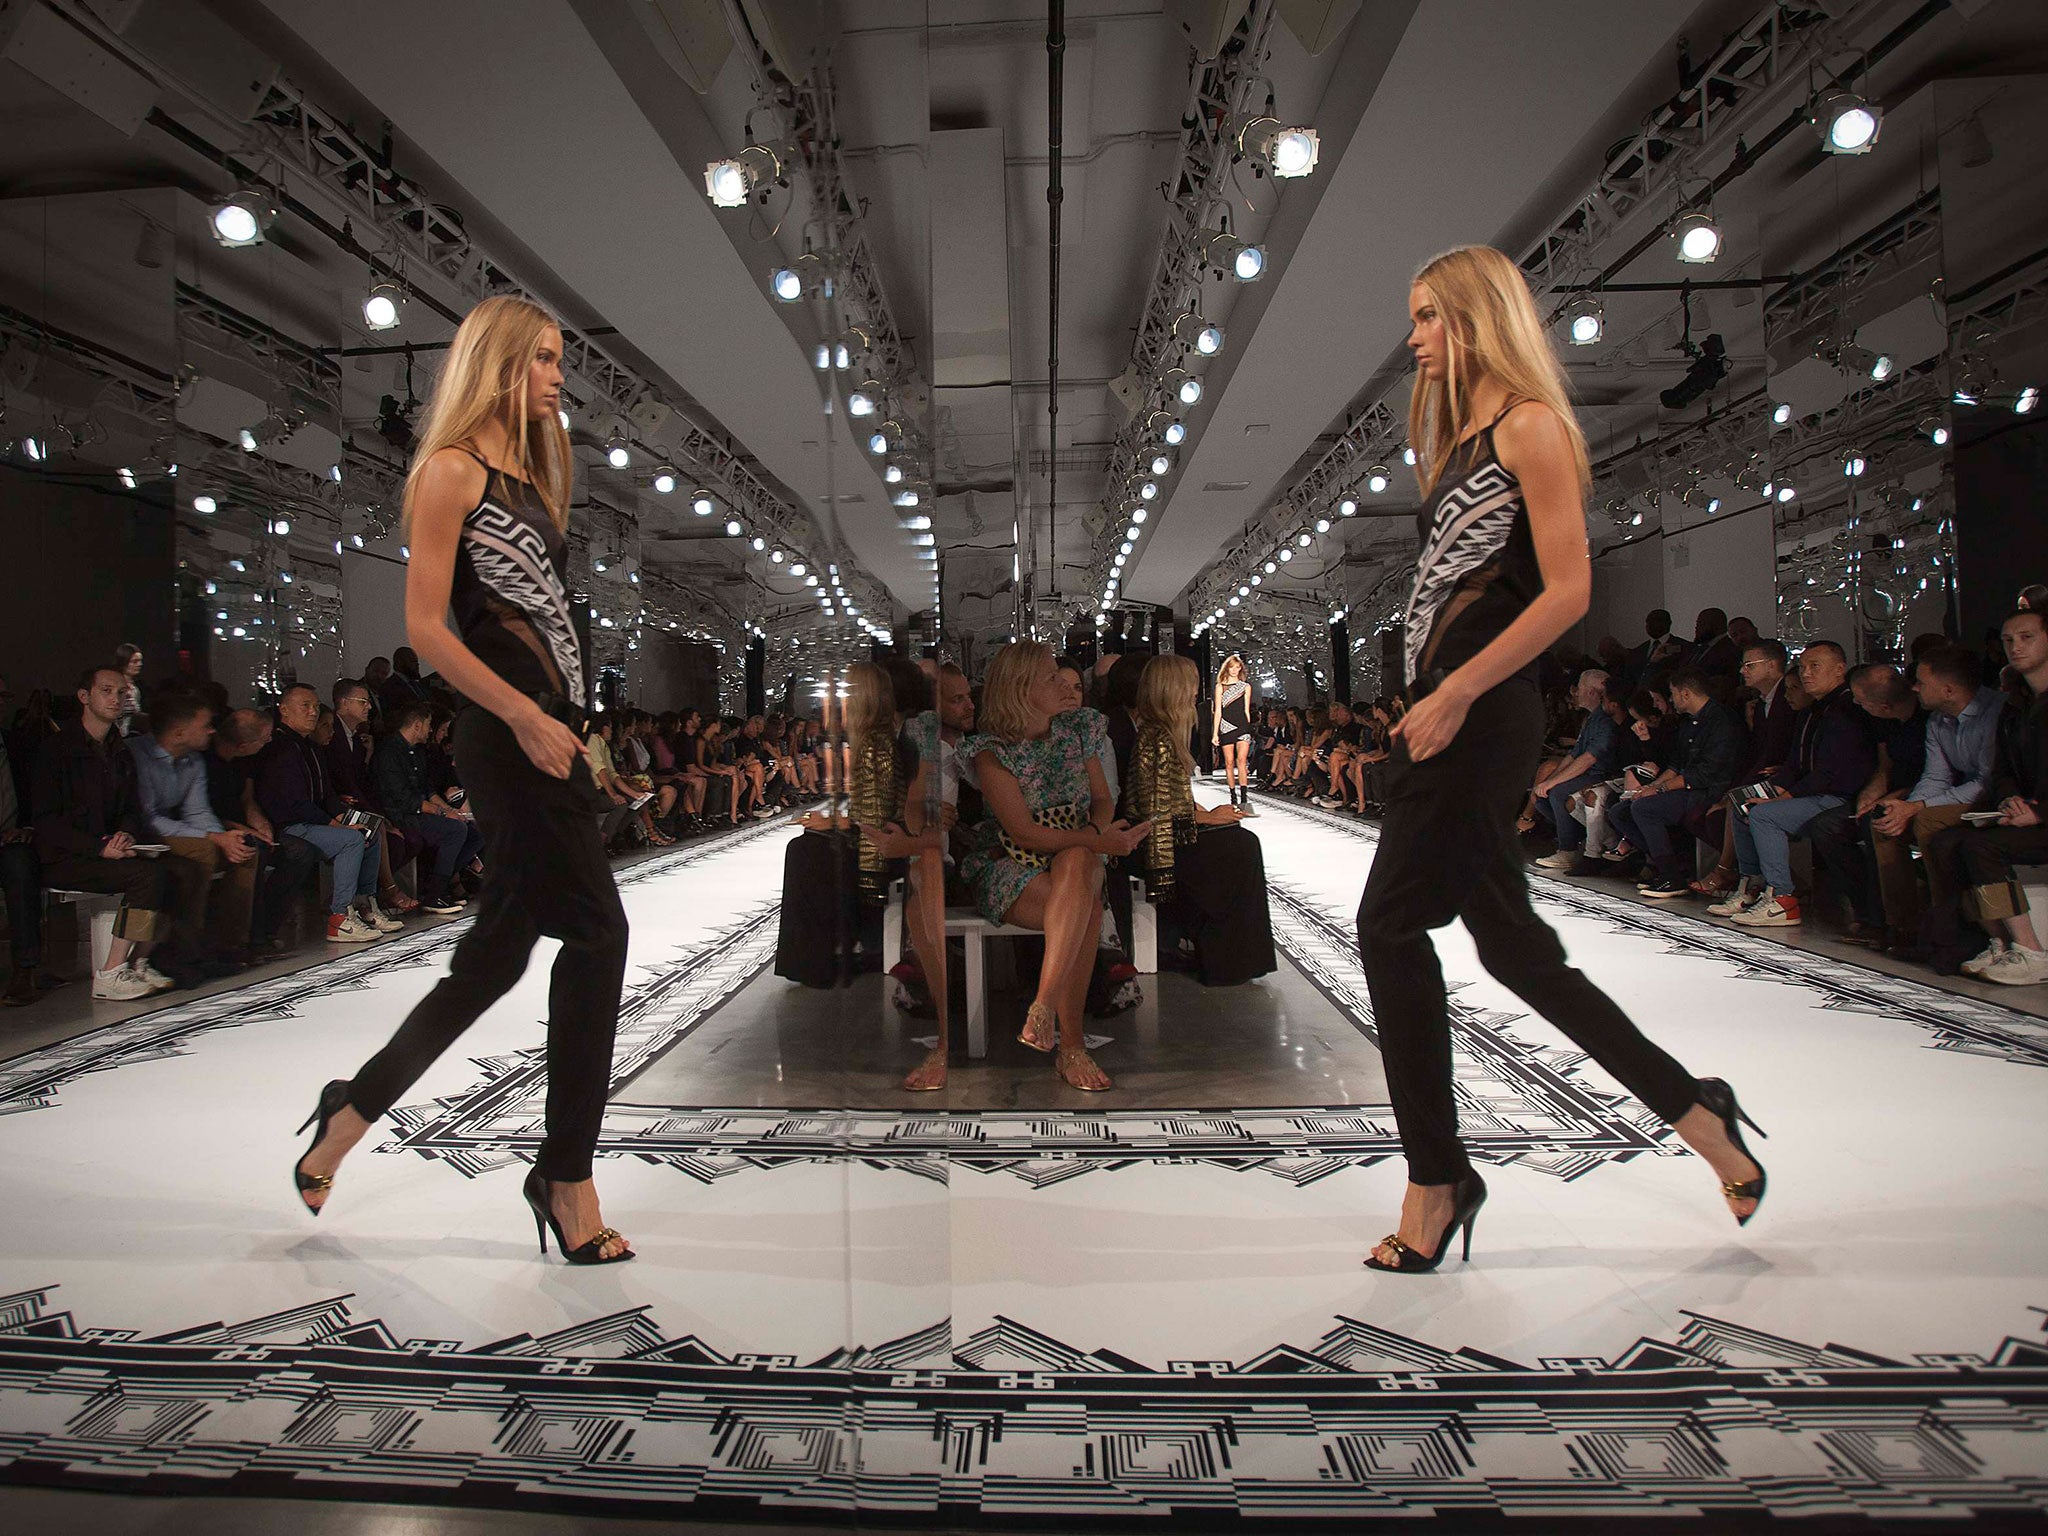 A catwalk model is reflected in a mirror during the Versus Versace show in New York’s Fashion Week